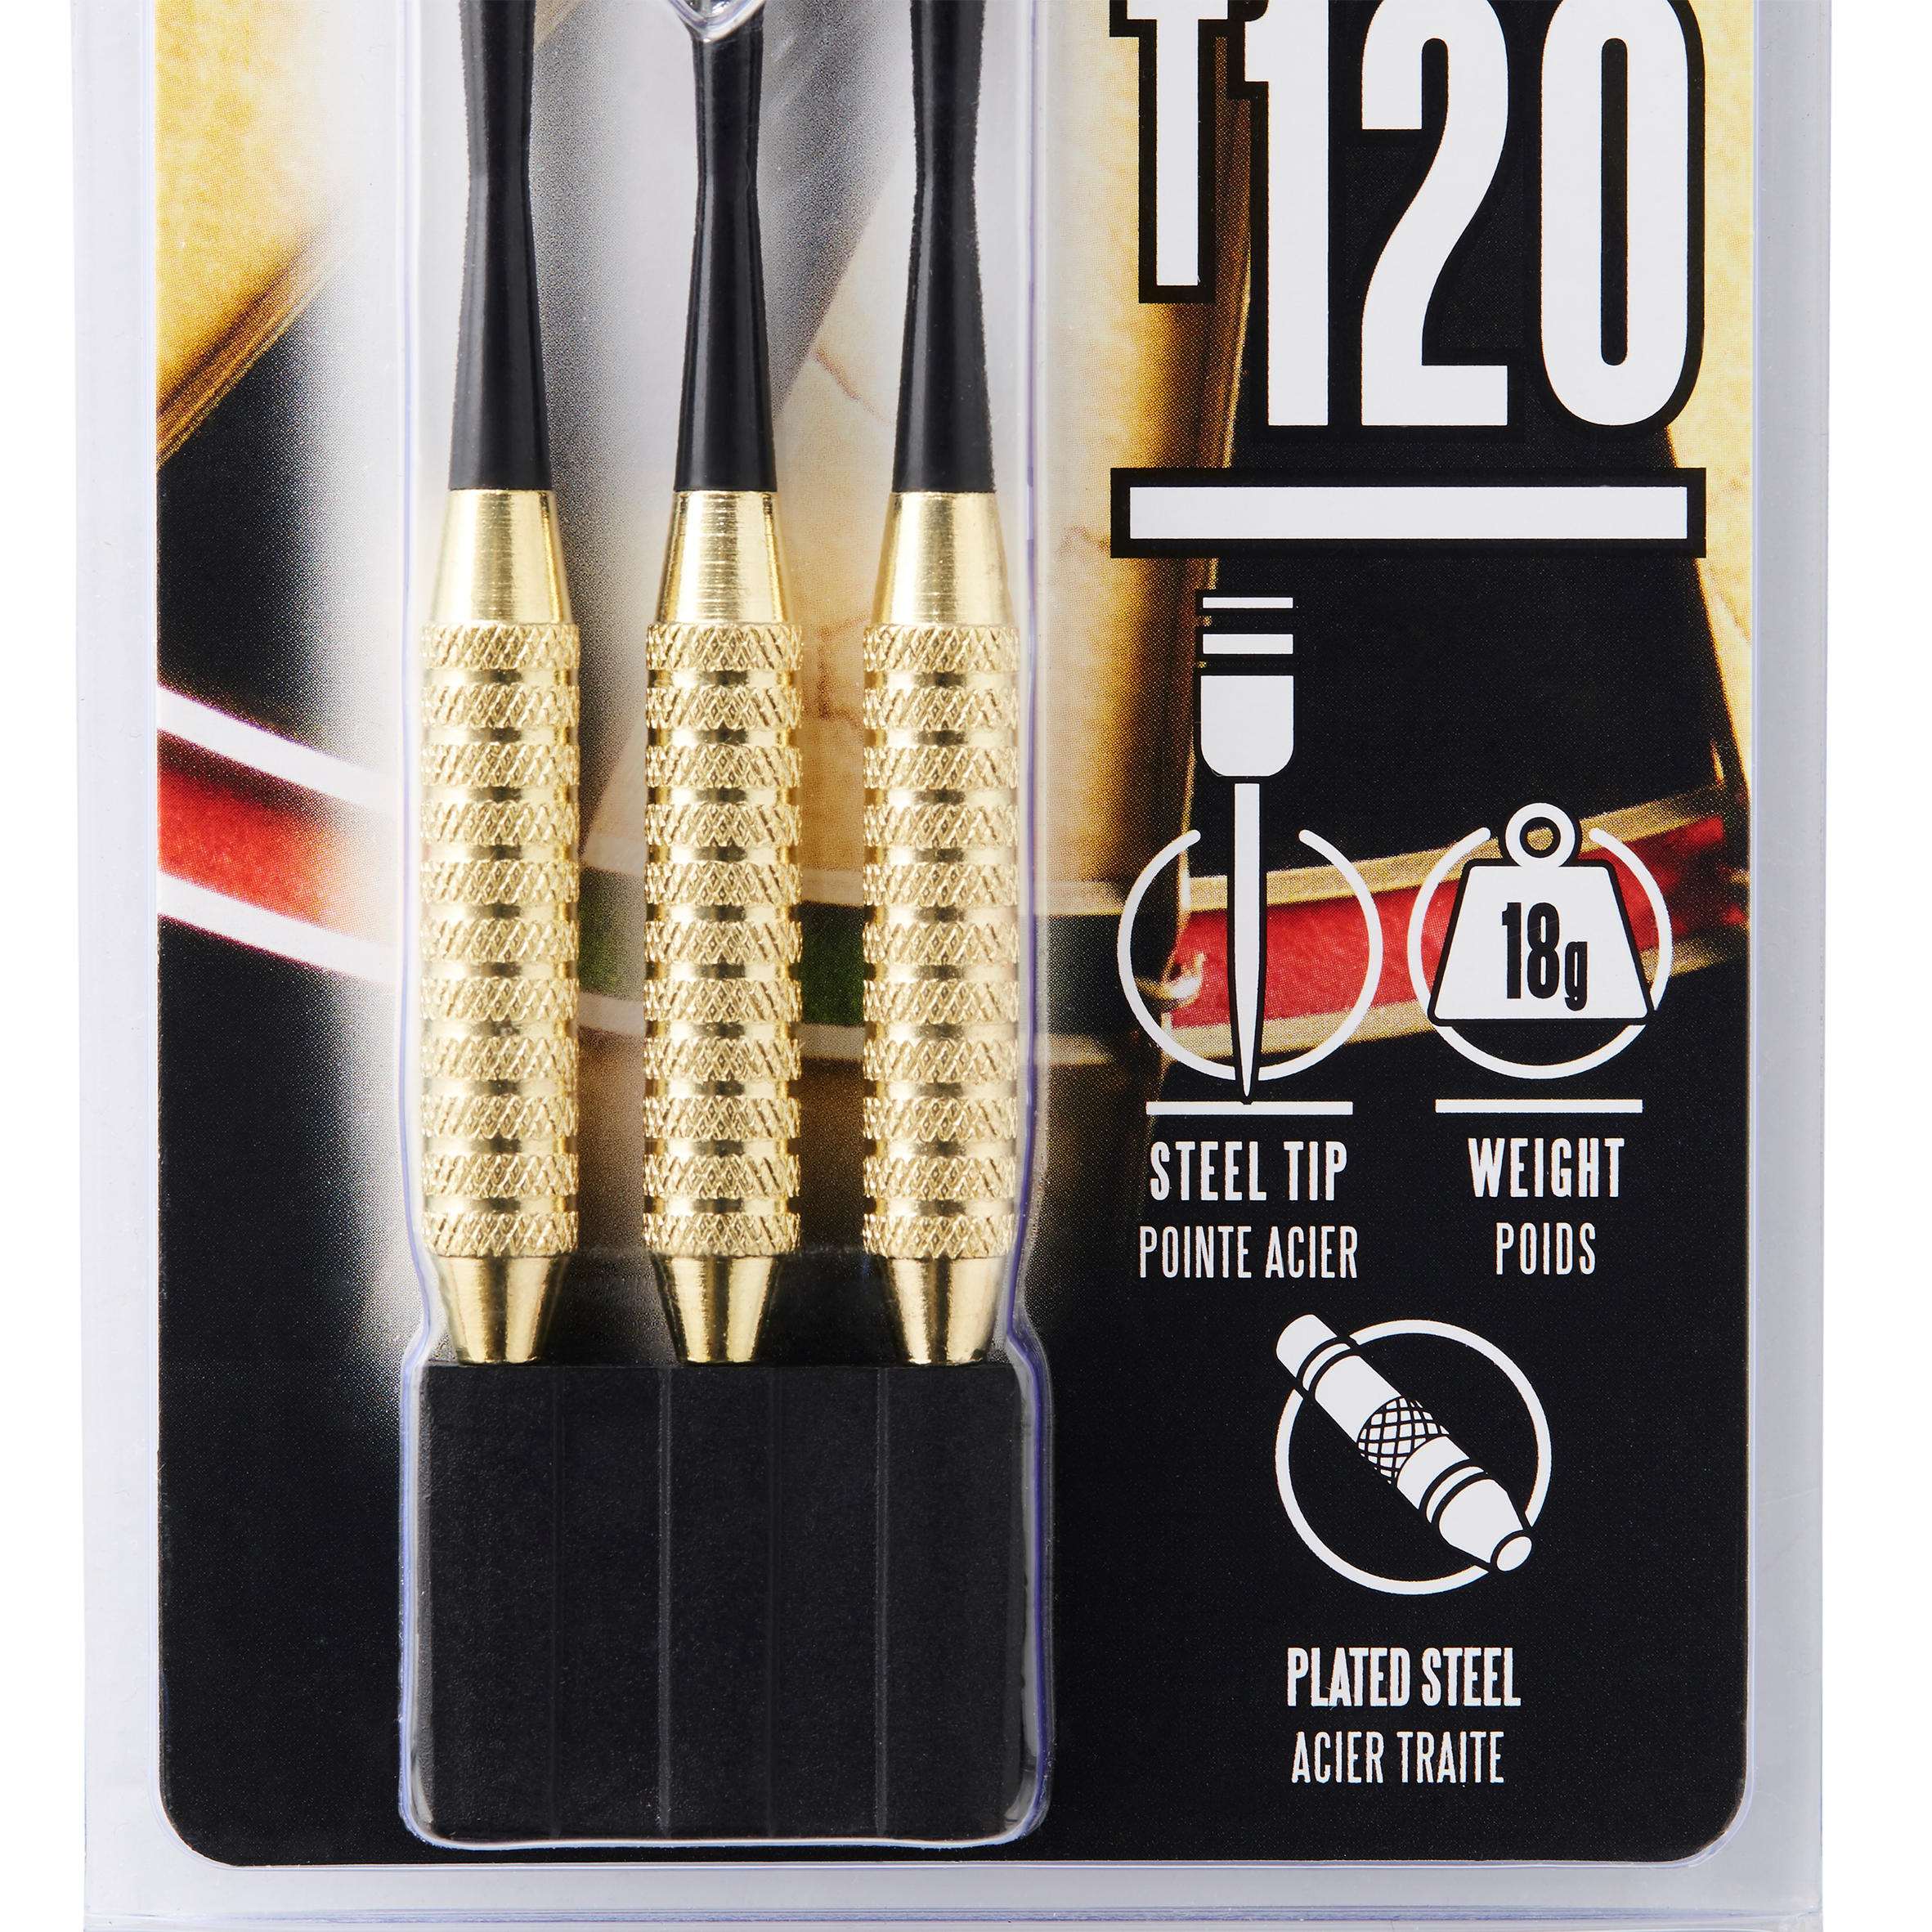 T120 Steel-Tipped Darts Tri-Pack - CANAVERAL